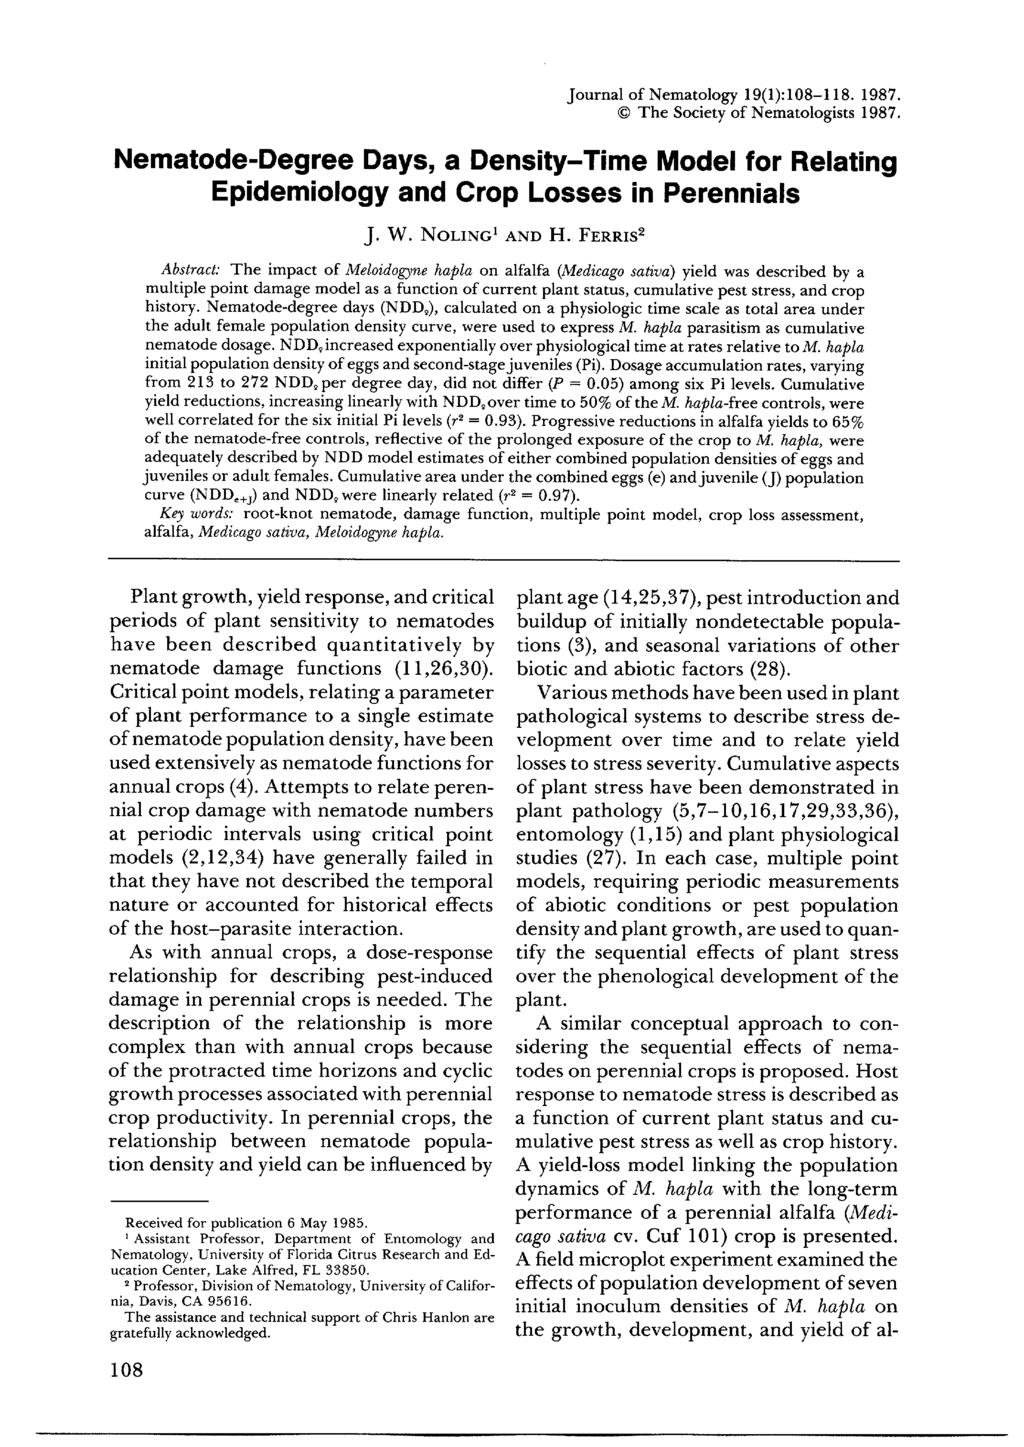 Journal of Nematology 19(1):108-118. 1987. The Society of Nematologists 1987. Nematode-Degree Days, a Density-Time Model for Relating Epidemiology and Crop Losses in Perennials J. W. NOLING 1 AND H.